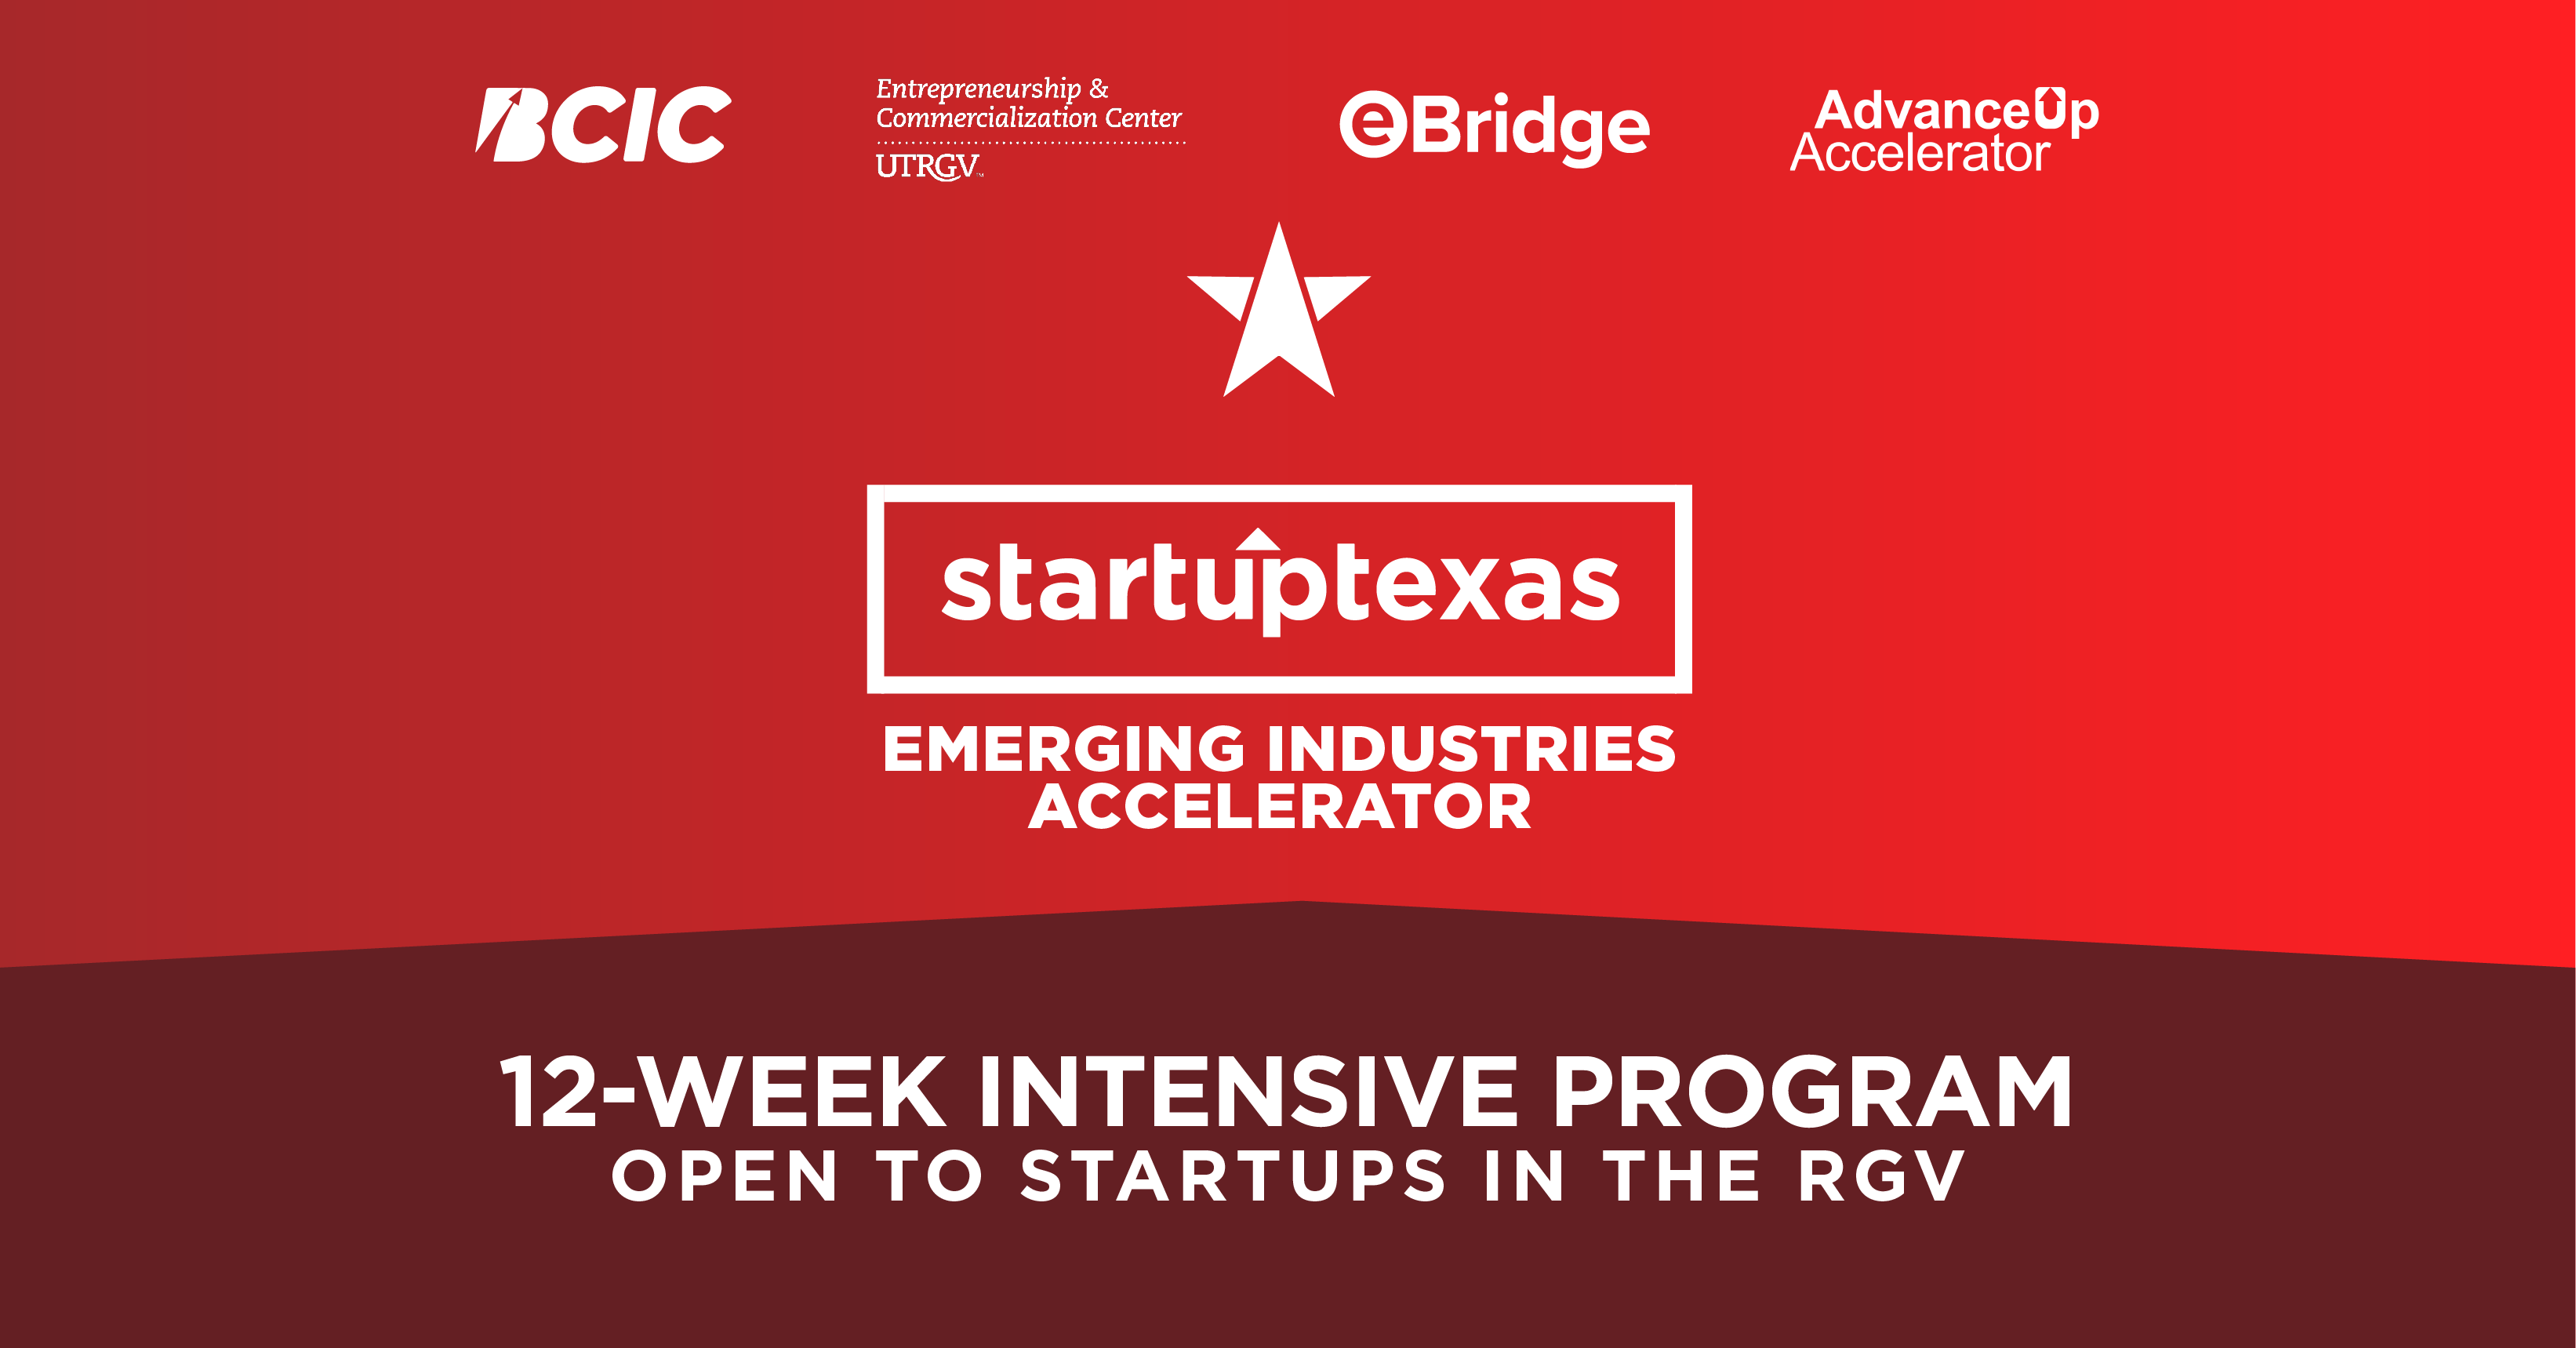 BCIC Announces New Cohort Applications for StartUp Texas Emerging Industries Accelerator